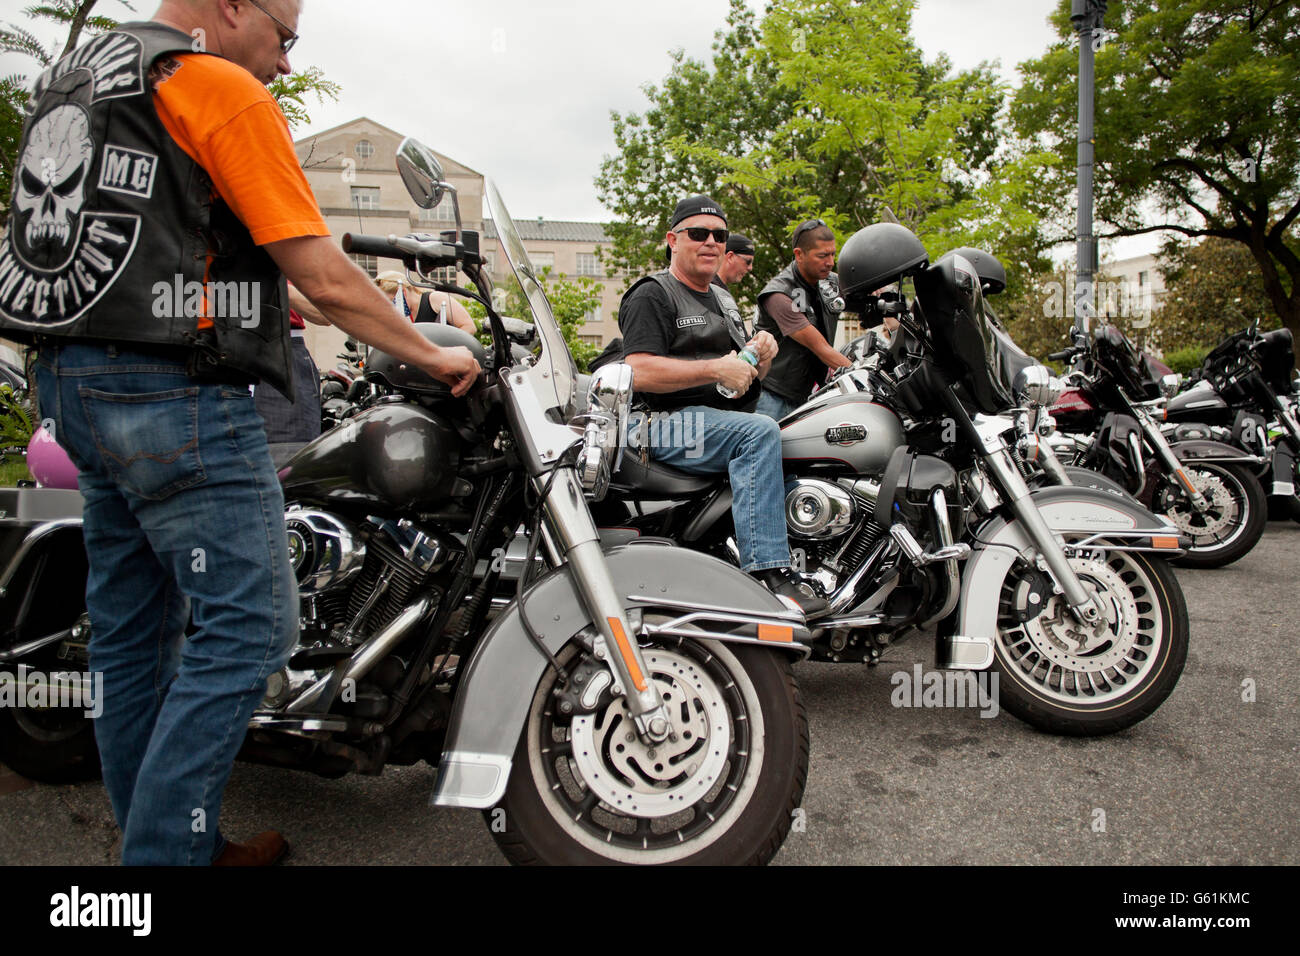 Washington, DC, USA, 29 mai 2016 : Memorial Day Rolling Thunder Riders prendre une pause Banque D'Images